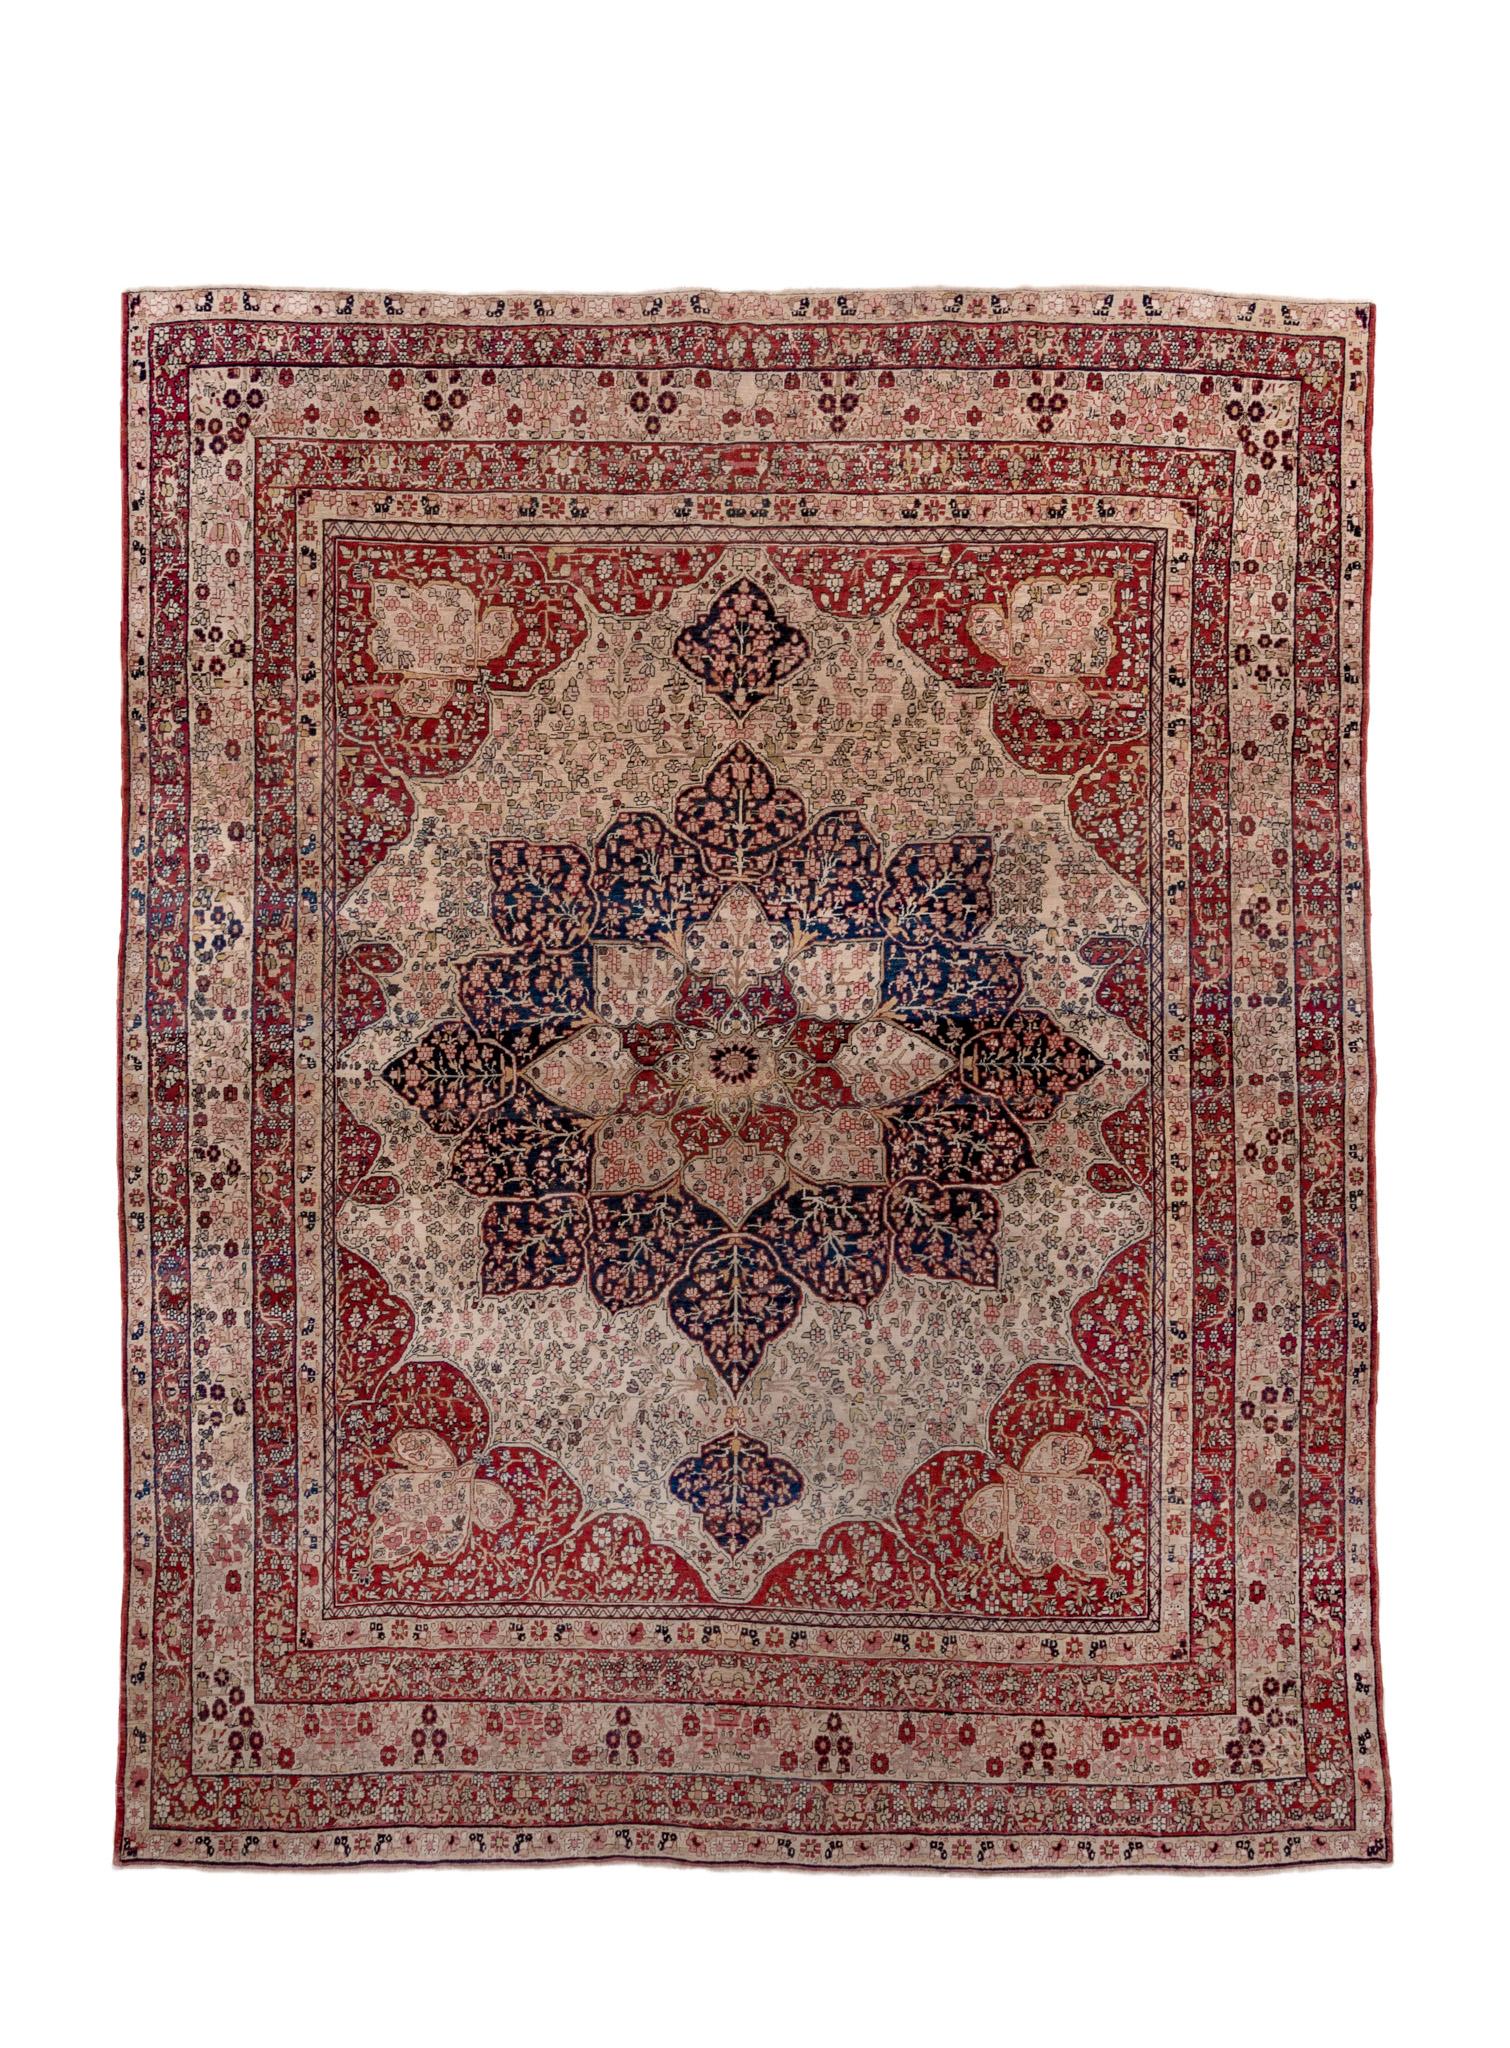 A Lavar rug circa 1910. Hand knotted, made of 100% wool yarn.